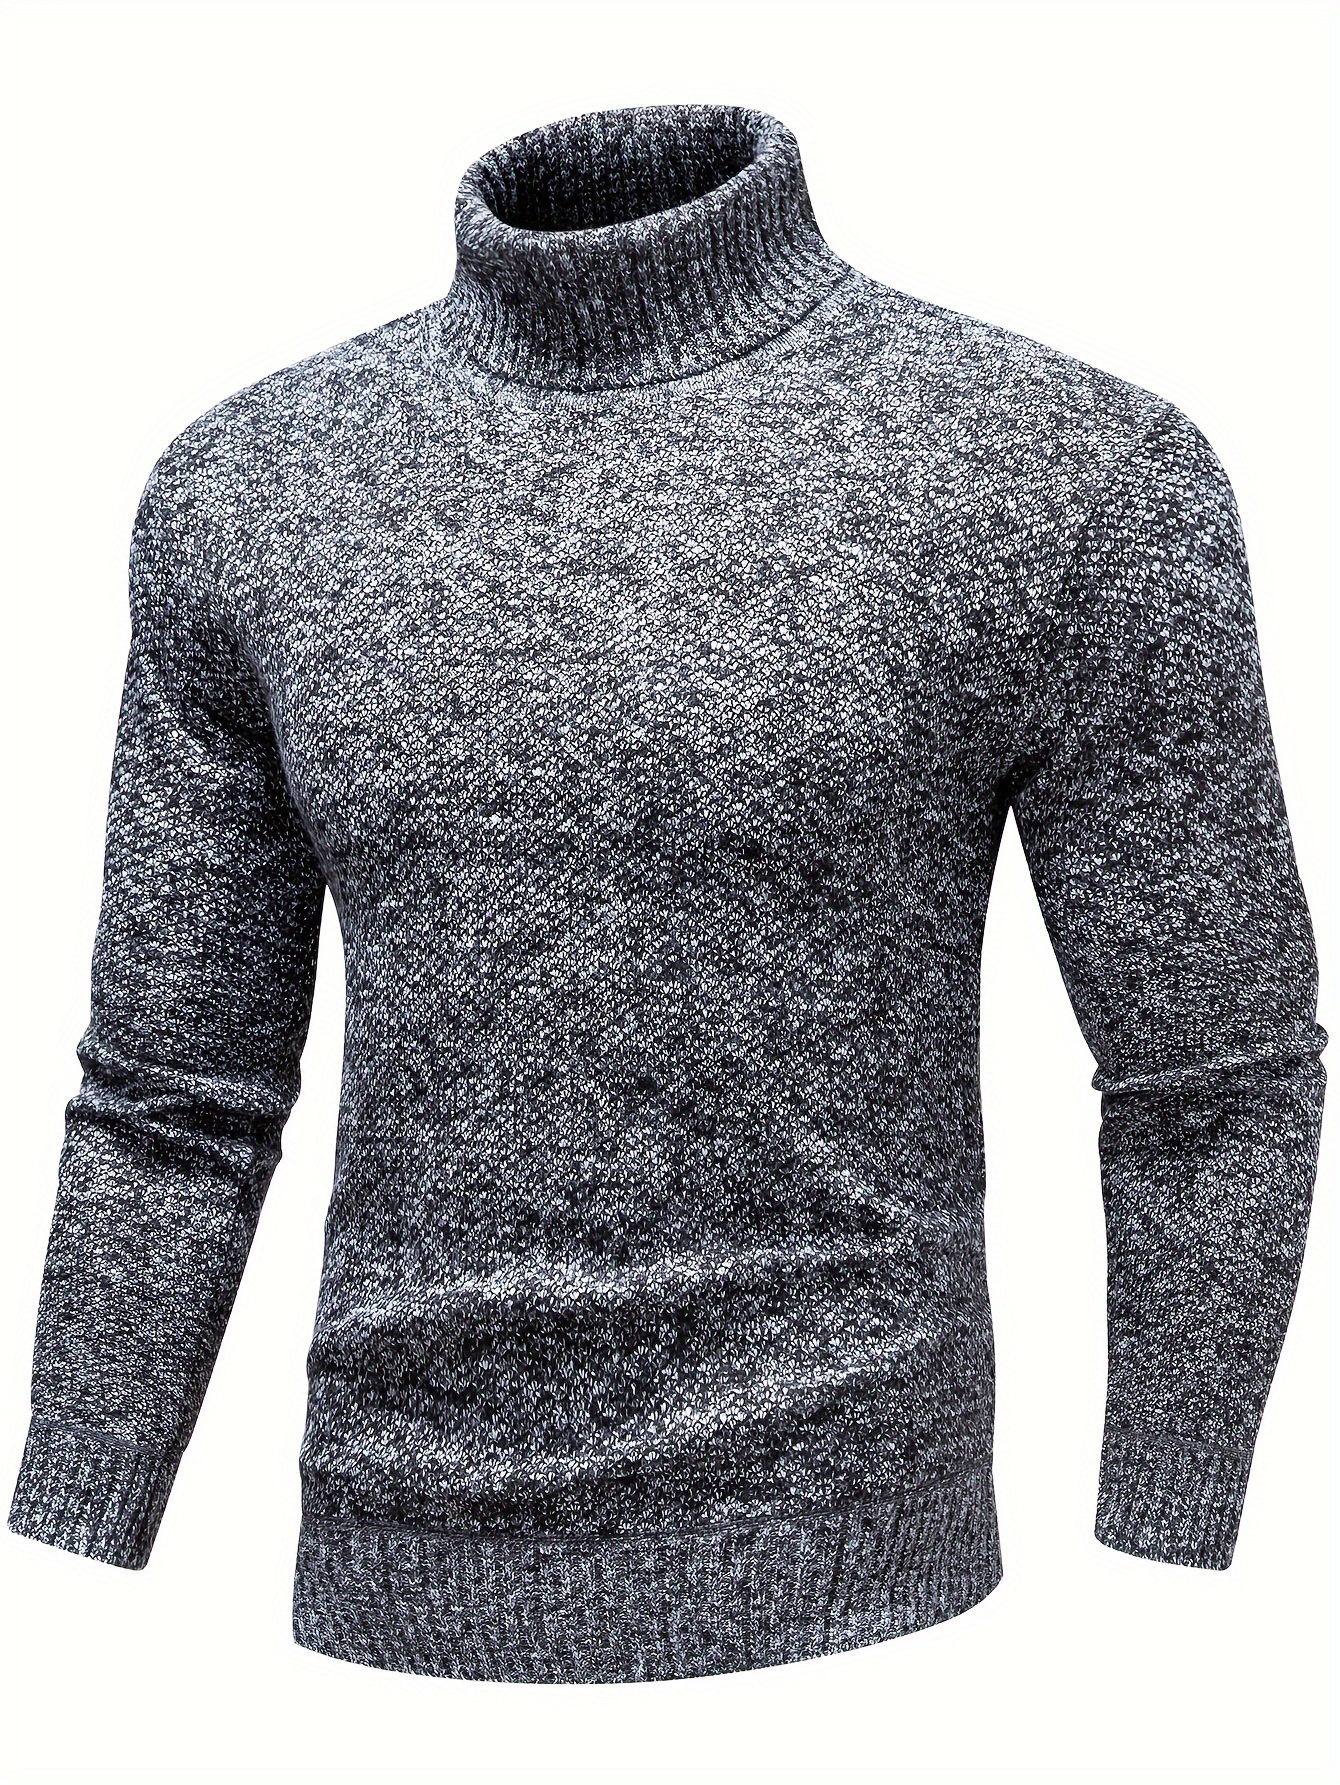 Pull Tricoté Homme - Mode Automne Hiver Tricot Chaud Pull Homme